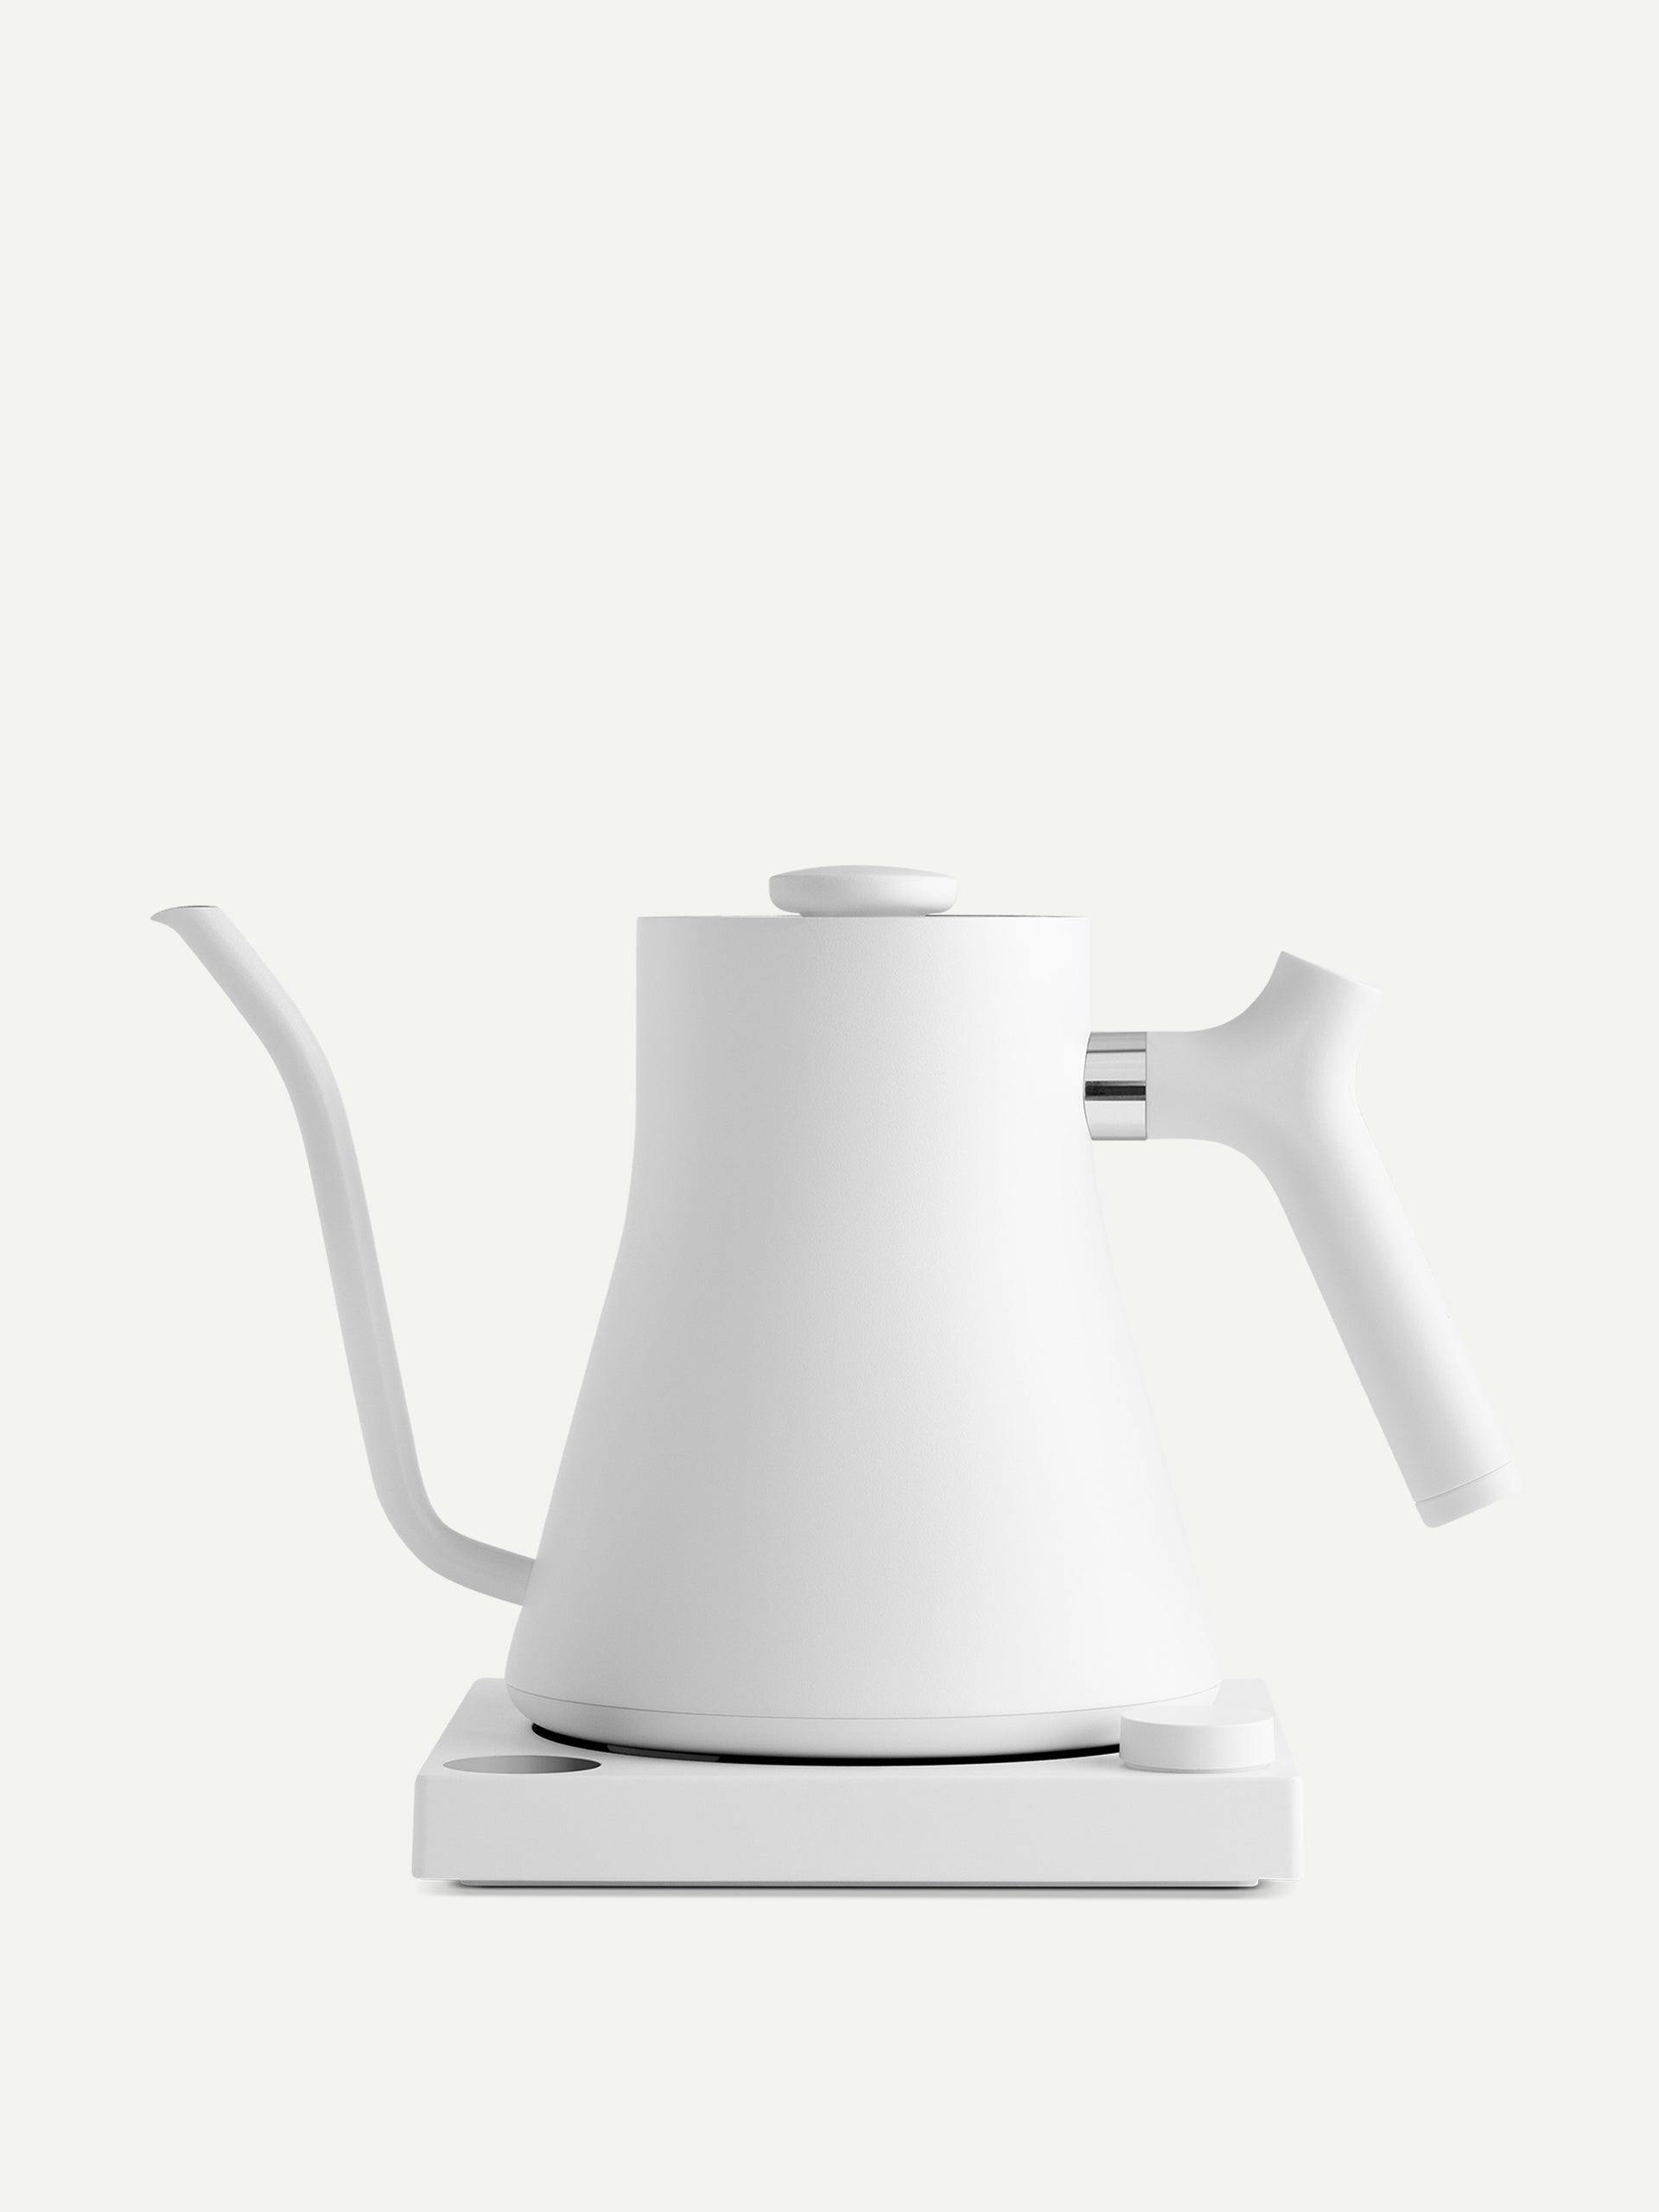 Stagg electric kettle